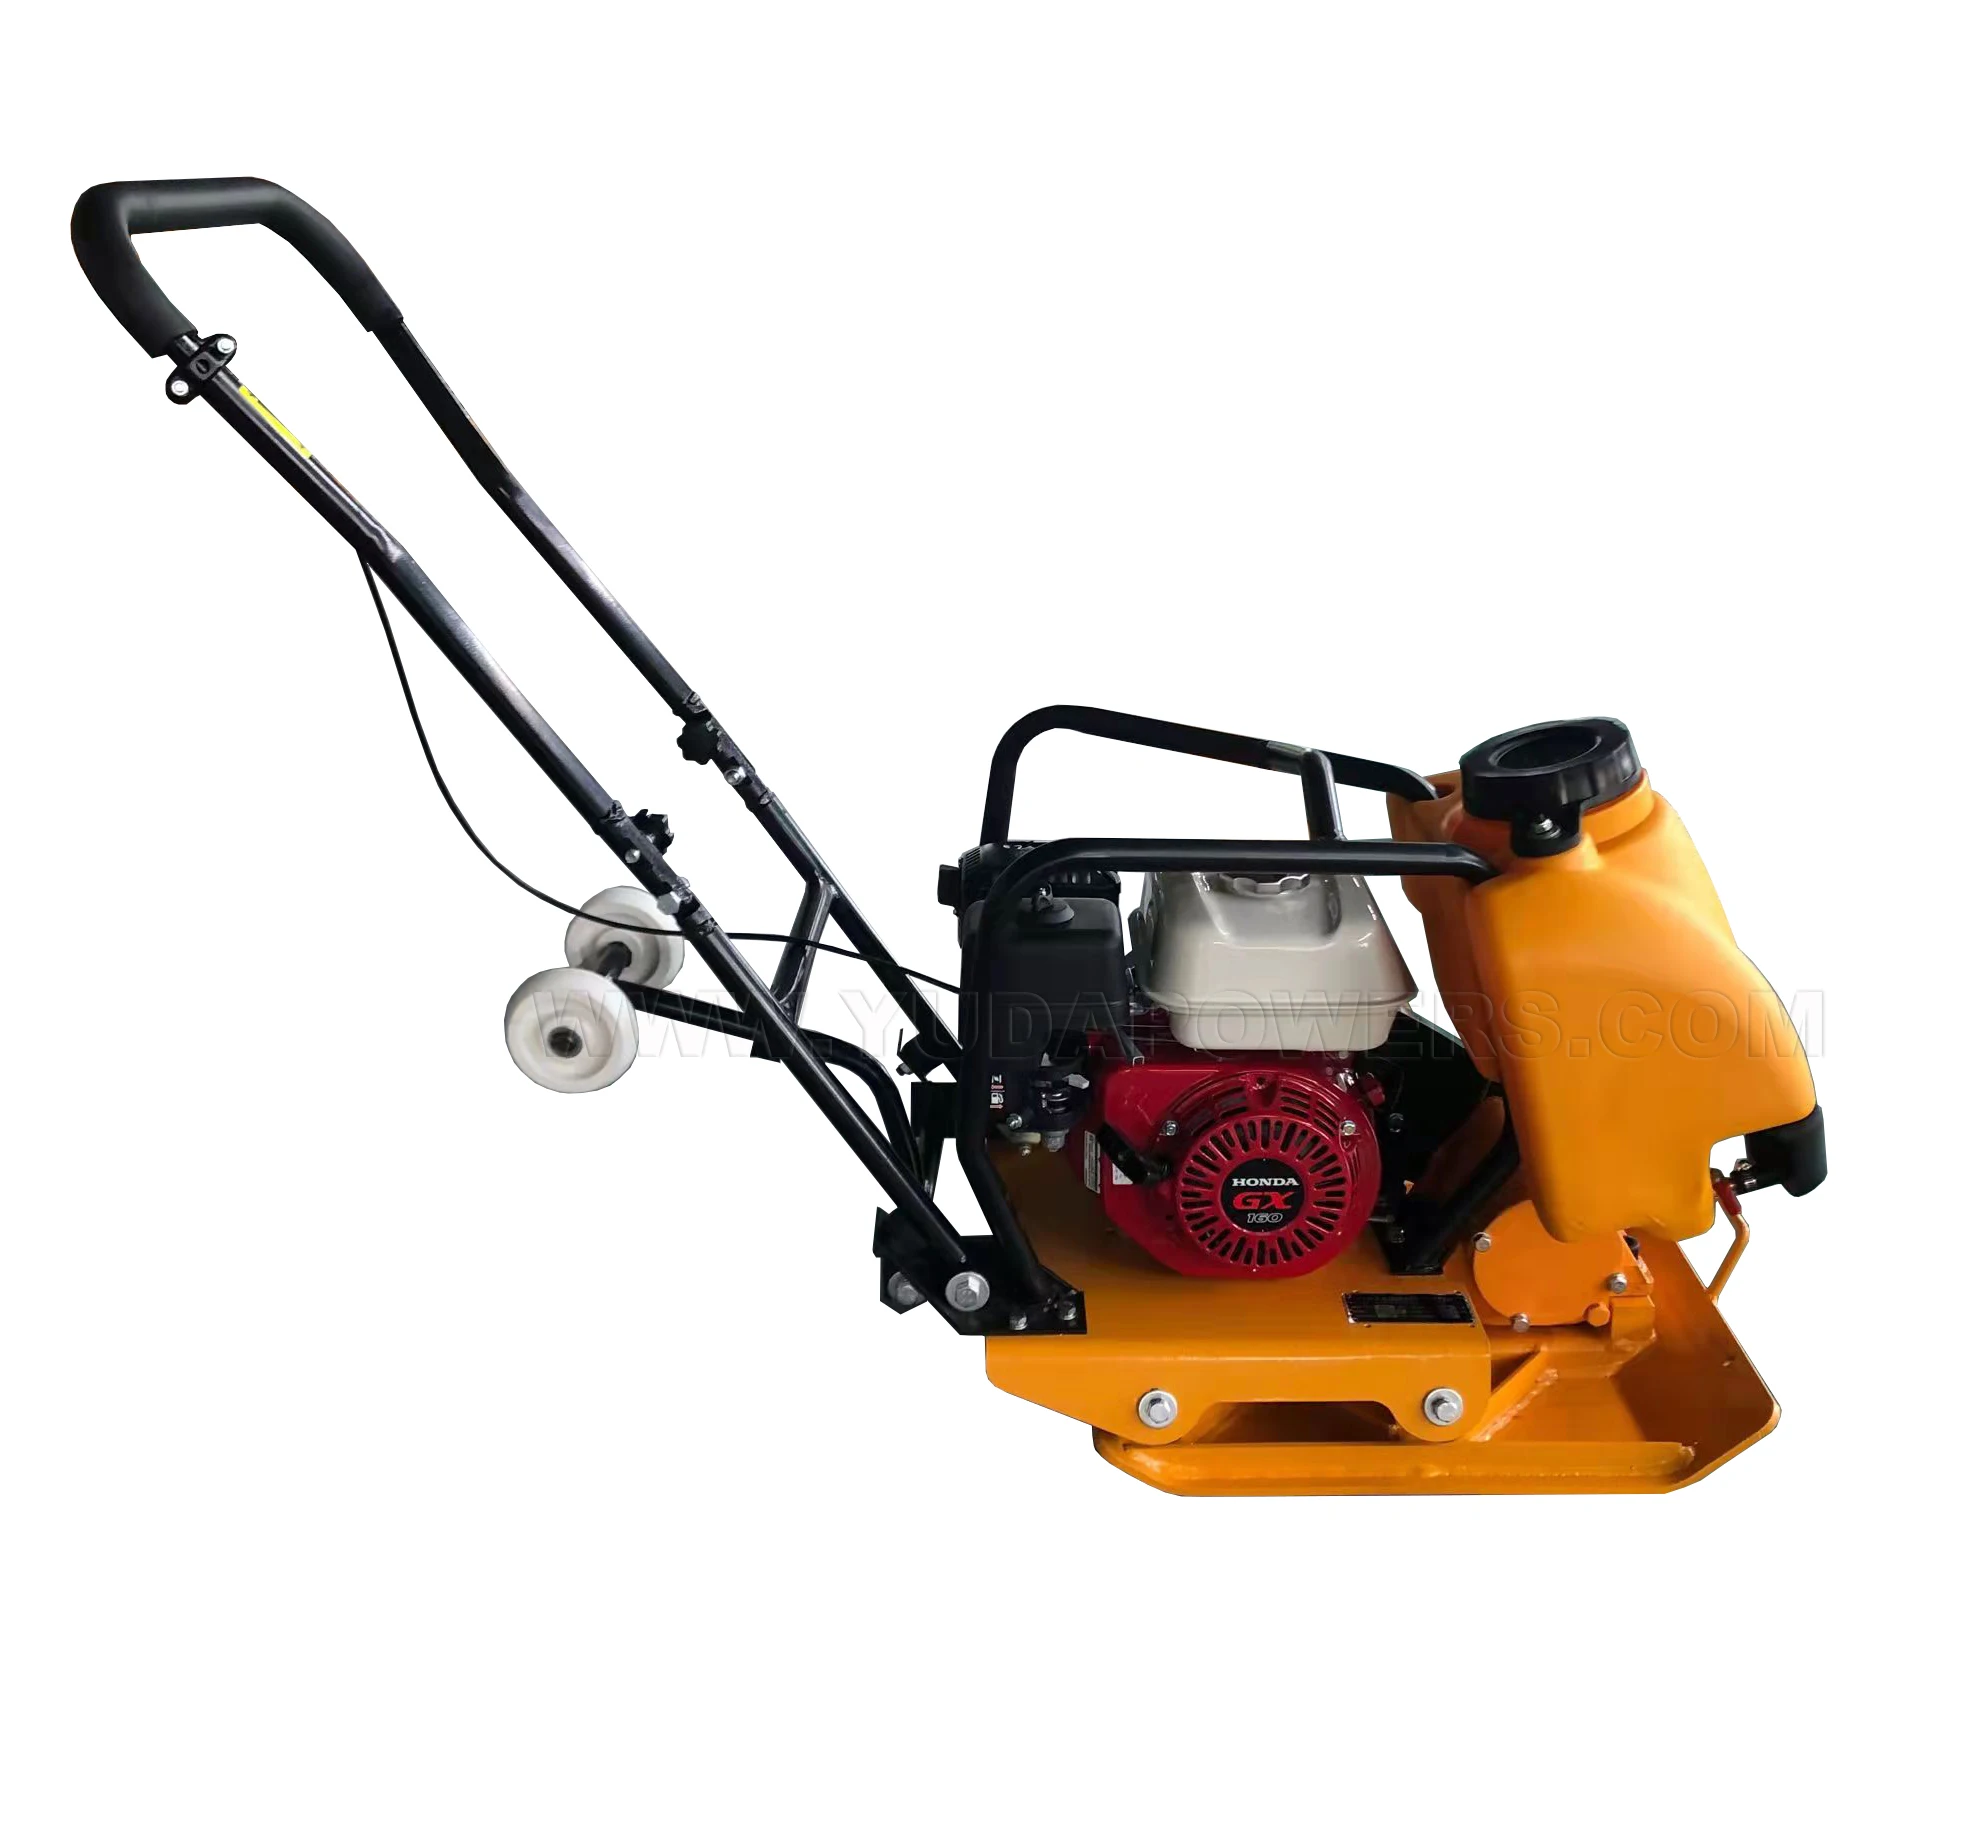 Gasoline Reversable Plate Compactor Clutch Manual Vibrating Earth Compactor For Sale Best Price/Gasoline Rammer